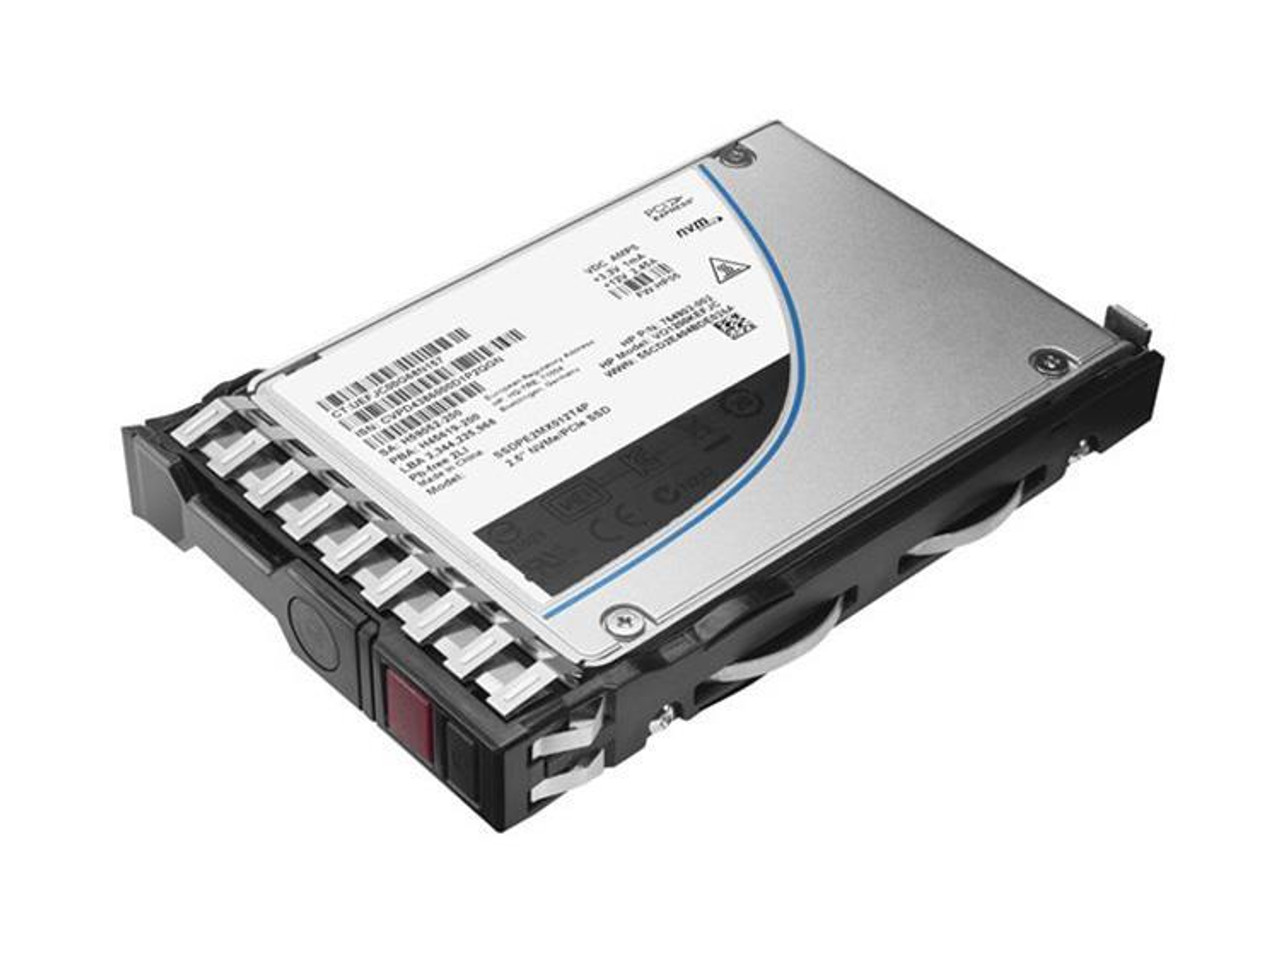 P21127-B21 HPE 800GB SAS 12Gbps Write Intensive 2.5-inch Internal Solid State Drive (SSD) with Smart Carrier